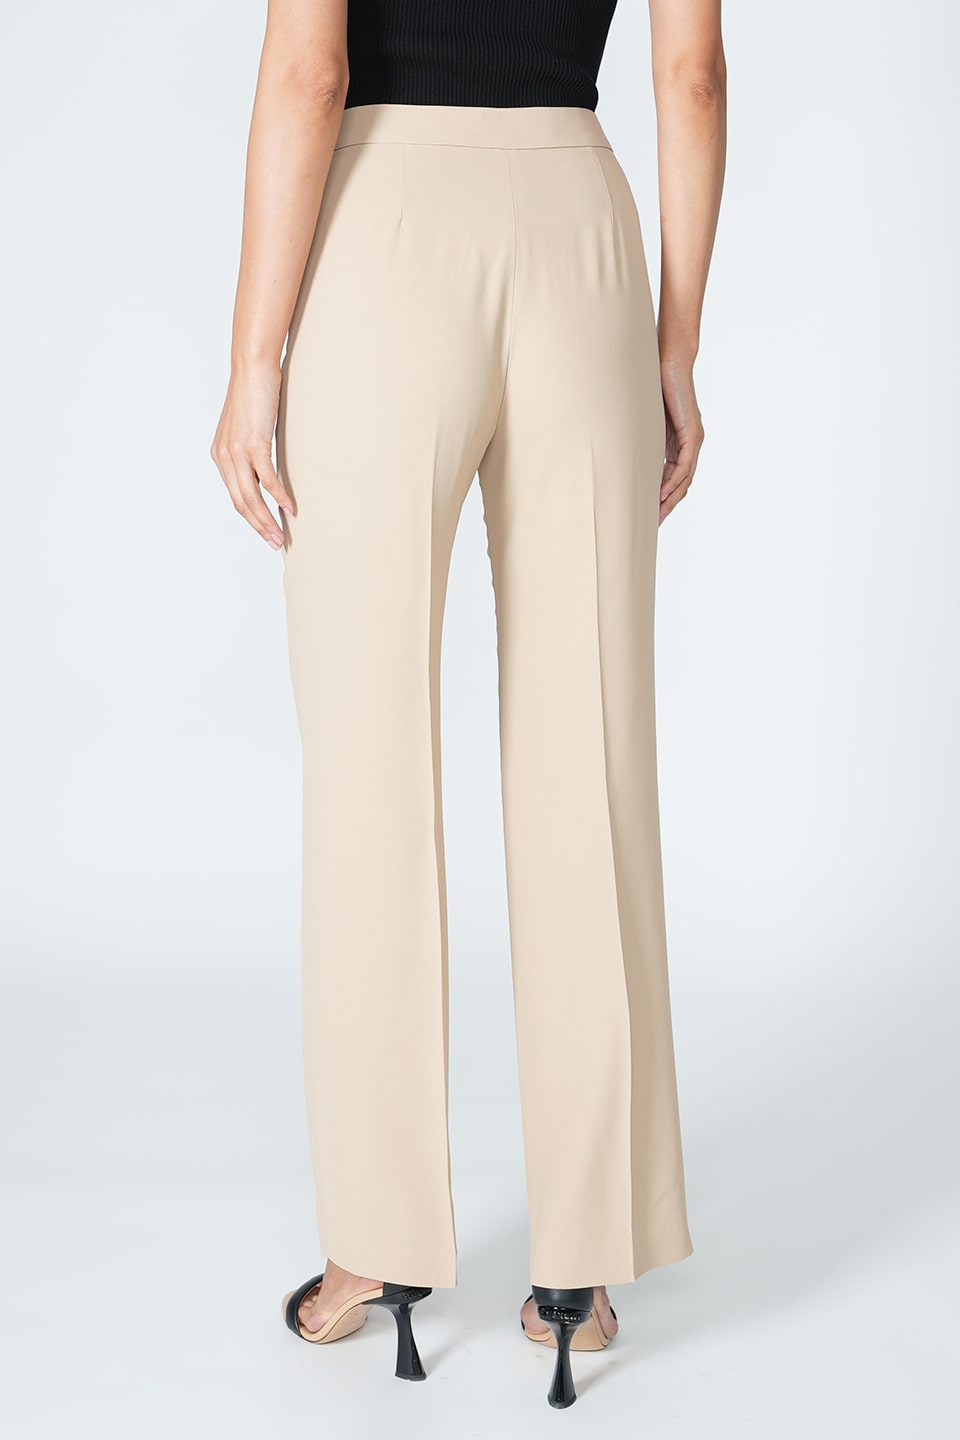 Designer Beige Women pants, shop online with free delivery in UAE. Product gallery 5